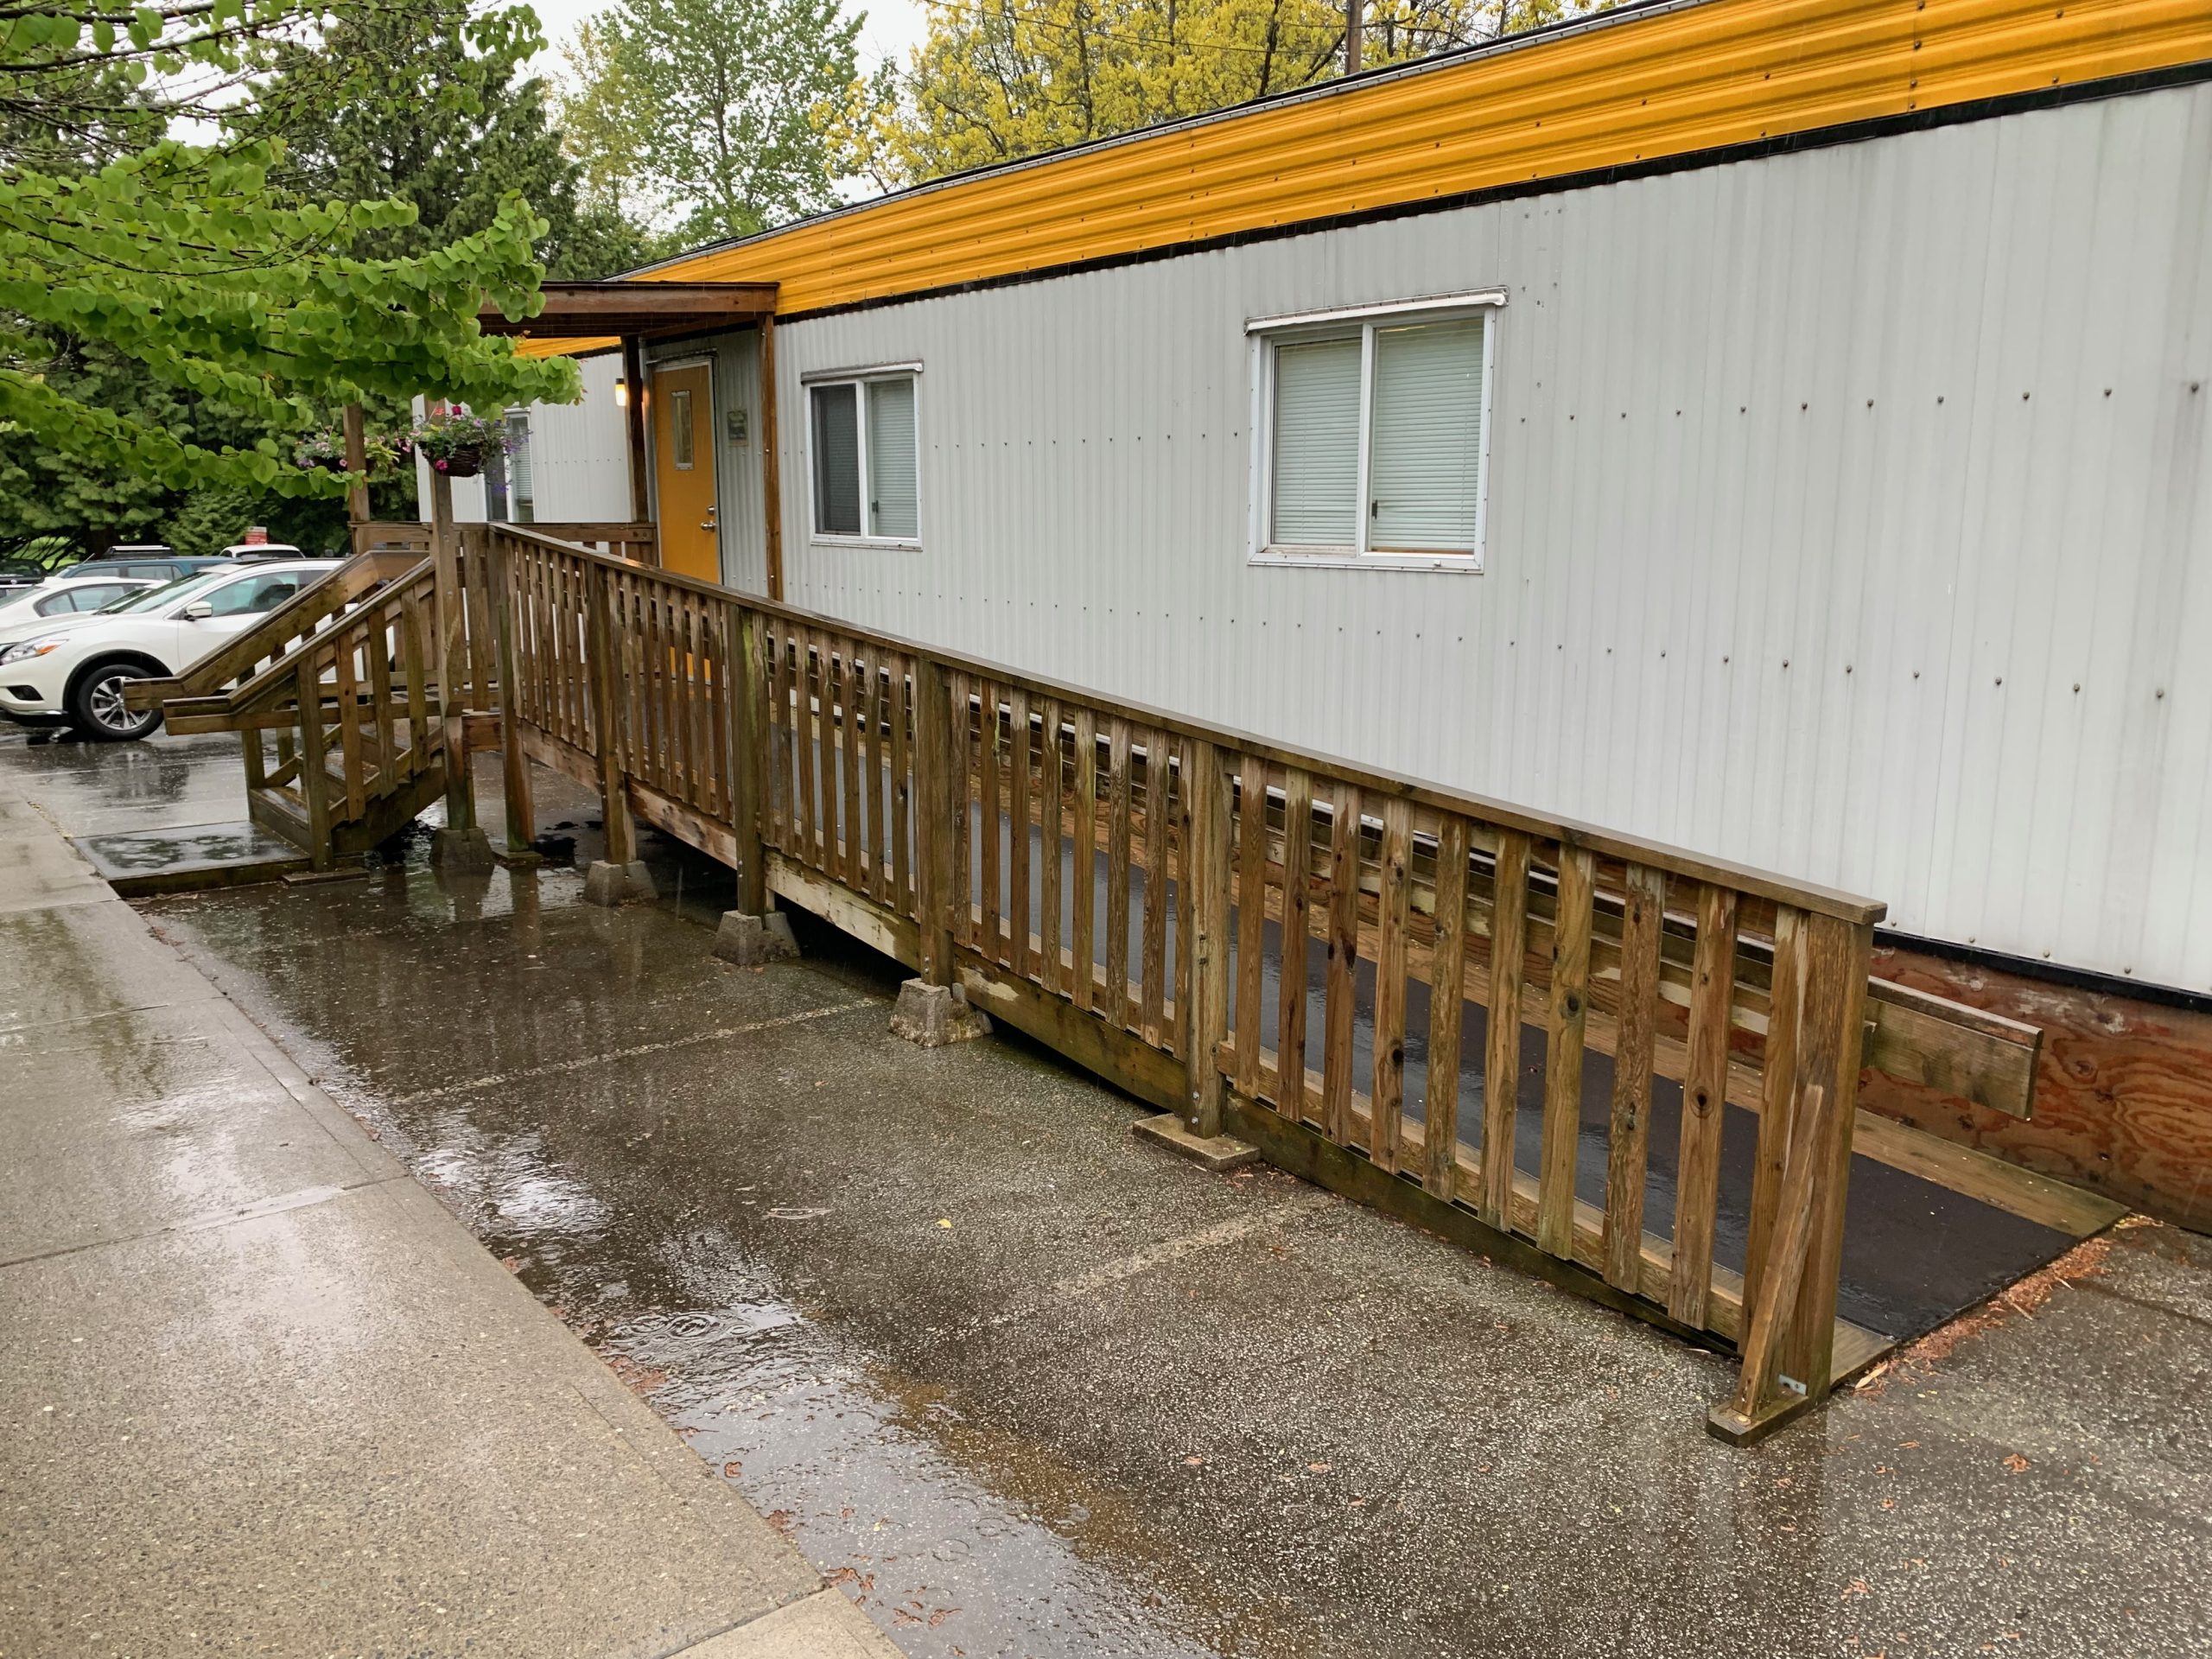 Wooden ramp beside a temporary building on a raining day